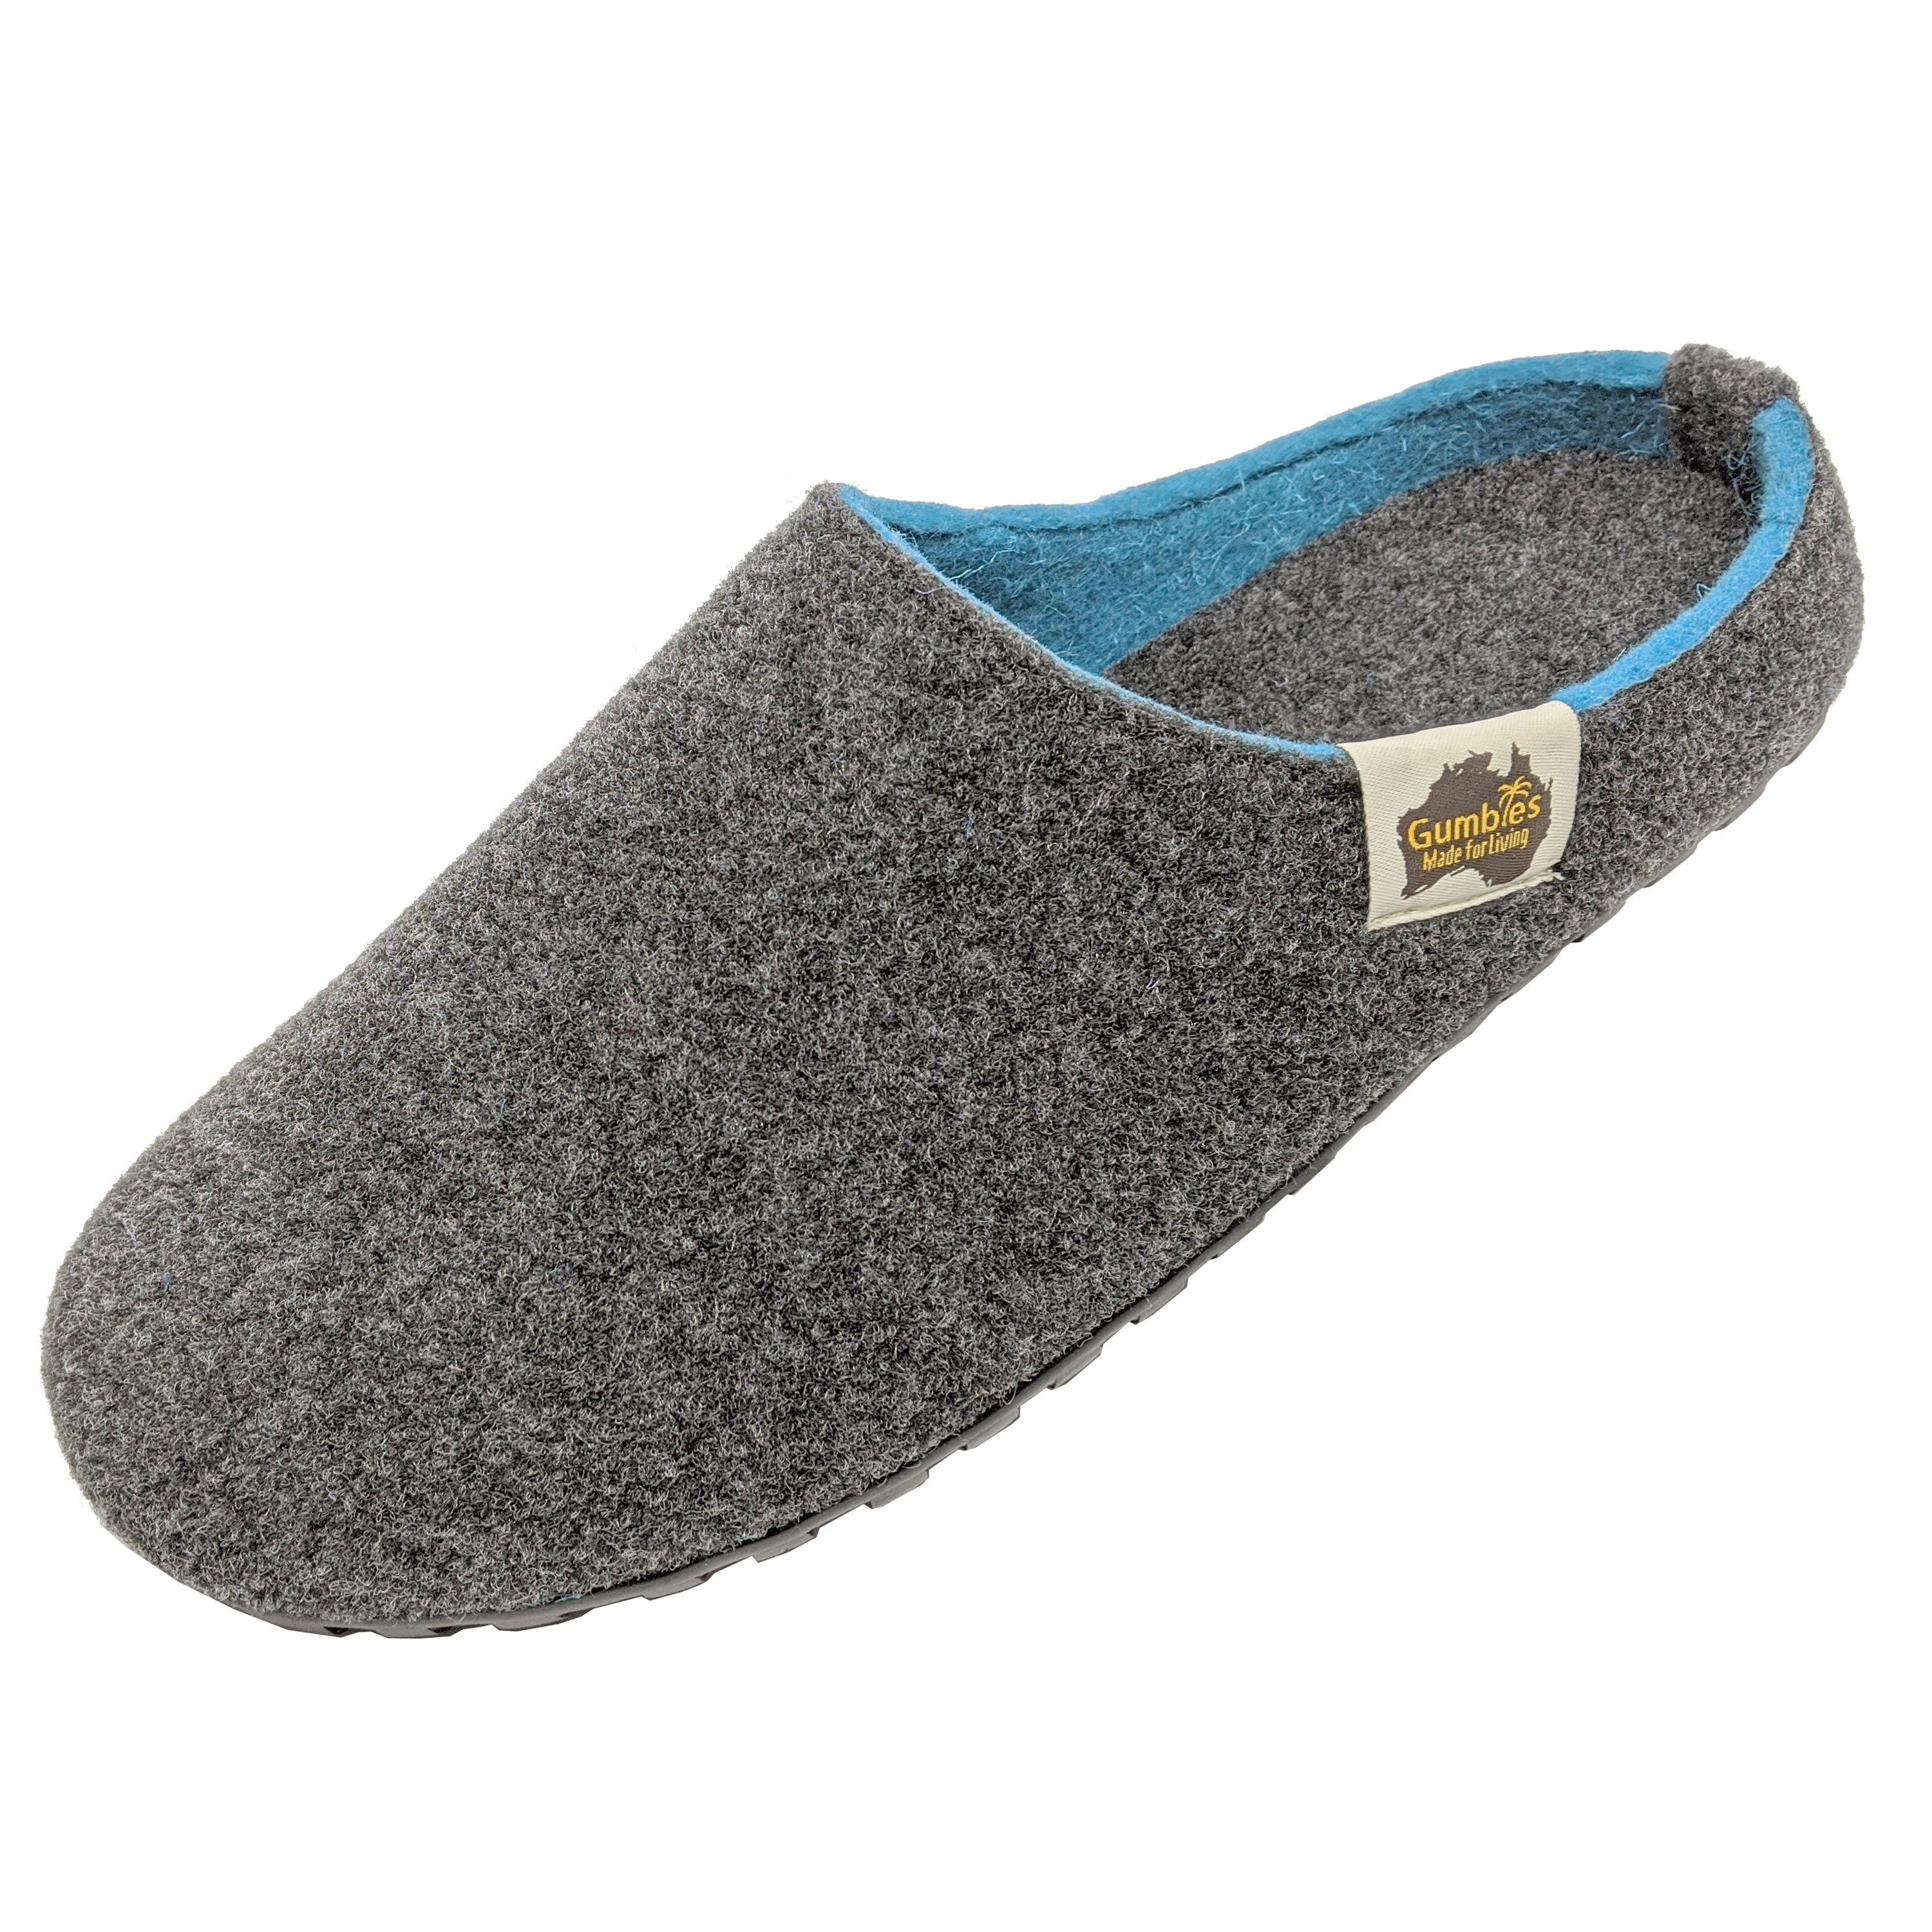 Gumbies Outback Slipper in Charcoal Turquoise Hausschuh aus recycelten Materialien »in farbenfrohen Designs« charcoal-turquoise